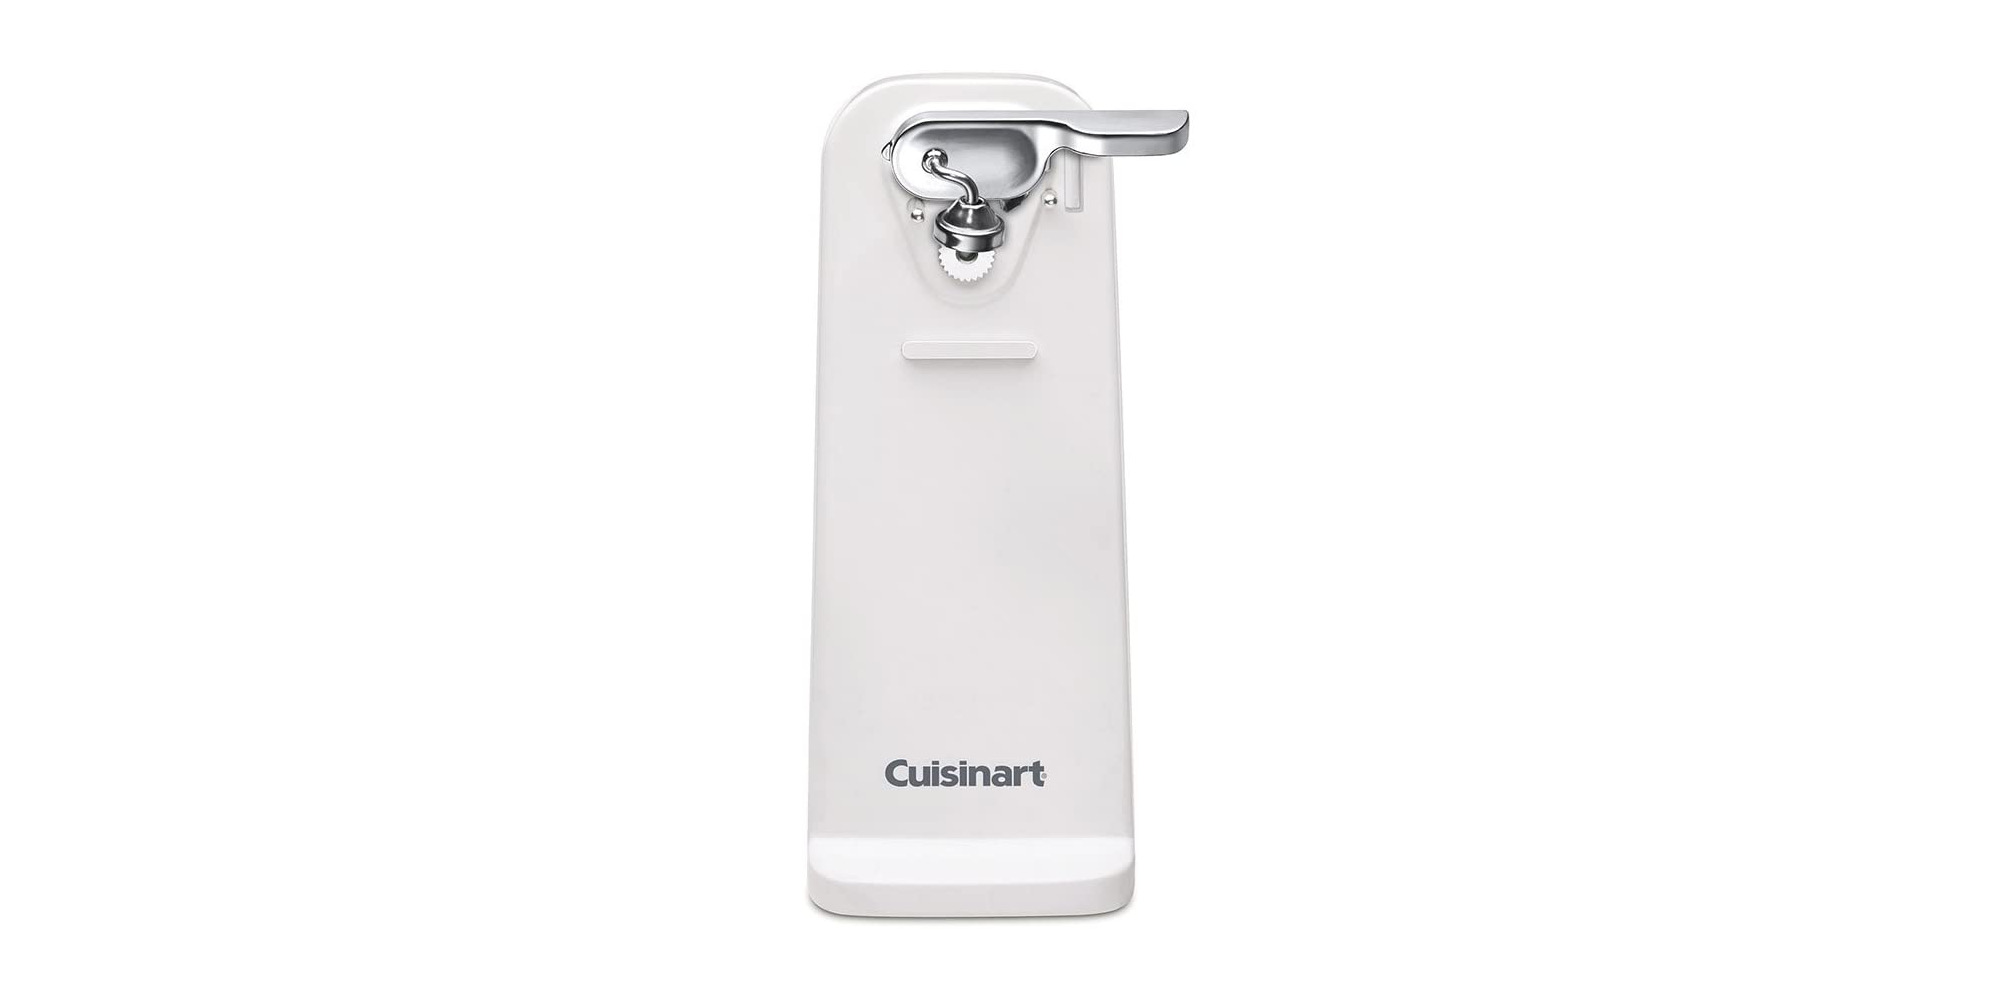 https://9to5toys.com/wp-content/uploads/sites/5/2021/10/Cuisinart-Deluxe-Electric-Can-Opener.jpg